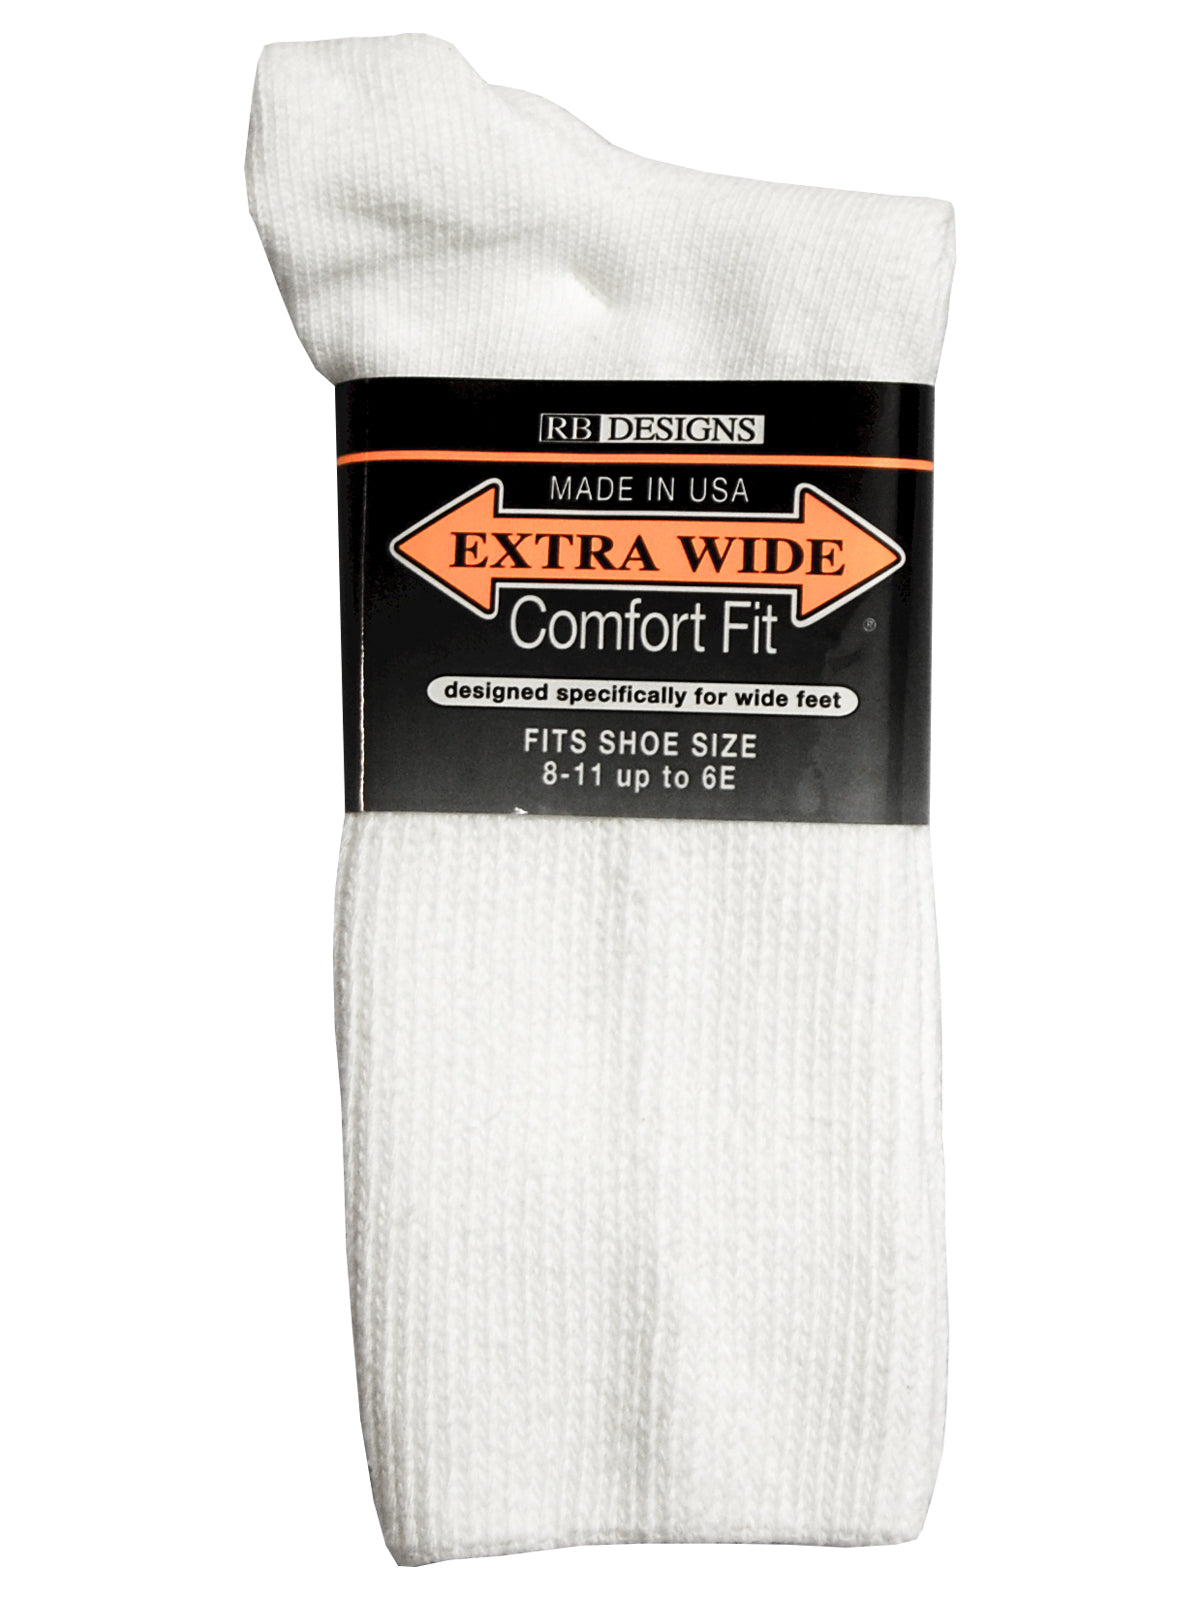 Extra Wide Men's Comfort Fit Athletic Crew Socks in White - Size X-Large (16.5 - 21)